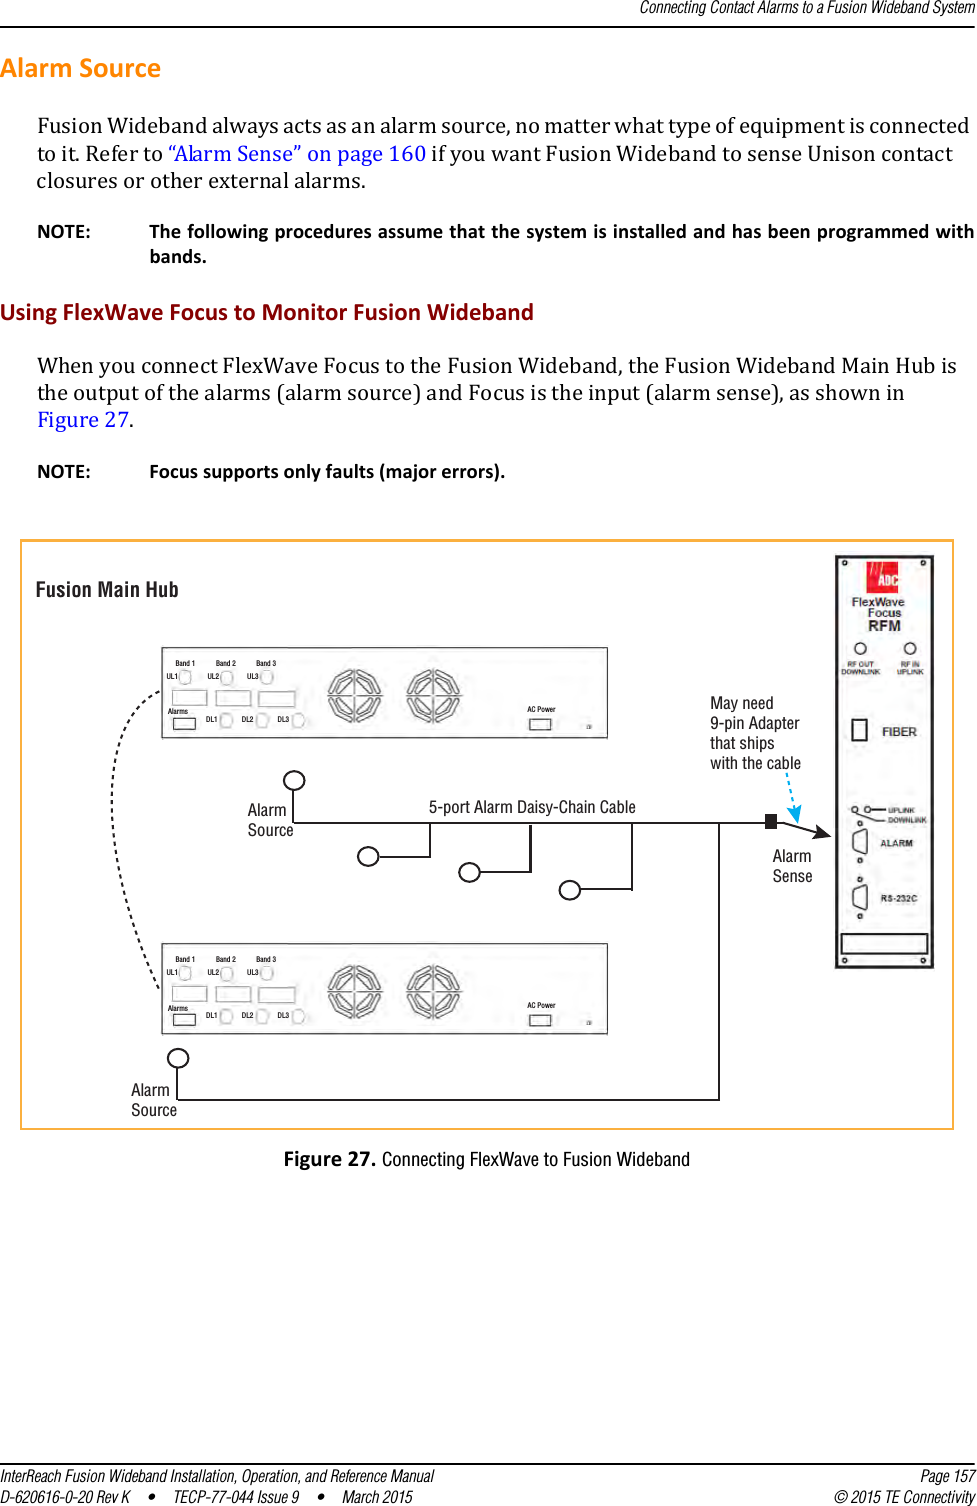 Connecting Contact Alarms to a Fusion Wideband SystemInterReach Fusion Wideband Installation, Operation, and Reference Manual Page 157D-620616-0-20 Rev K  •  TECP-77-044 Issue 9  •  March 2015 © 2015 TE ConnectivityAlarm SourceFusion Wideband always acts as an alarm source, no matter what type of equipment is connected to it. Refer to “Alarm Sense” on page 160 if you want Fusion Wideband to sense Unison contact closures or other external alarms.NOTE: The following procedures assume that the system is installed and has been programmed with bands. Using FlexWave Focus to Monitor Fusion WidebandWhen you connect FlexWave Focus to the Fusion Wideband, the Fusion Wideband Main Hub is the output of the alarms (alarm source) and Focus is the input (alarm sense), as shown in Figure 27. NOTE: Focus supports only faults (major errors).Figure 27. Connecting FlexWave to Fusion Wideband Band 1 Band 2 Band 3UL1 UL2 UL3AlarmsDL1 DL2 DL3AC PowerBand 1 Band 2 Band 3UL1 UL2 UL3AlarmsDL1 DL2 DL3AC PowerFusion Main HubMay need9-pin Adapterthat shipswith the cableAlarmSense5-port Alarm Daisy-Chain CableAlarmSourceAlarmSource